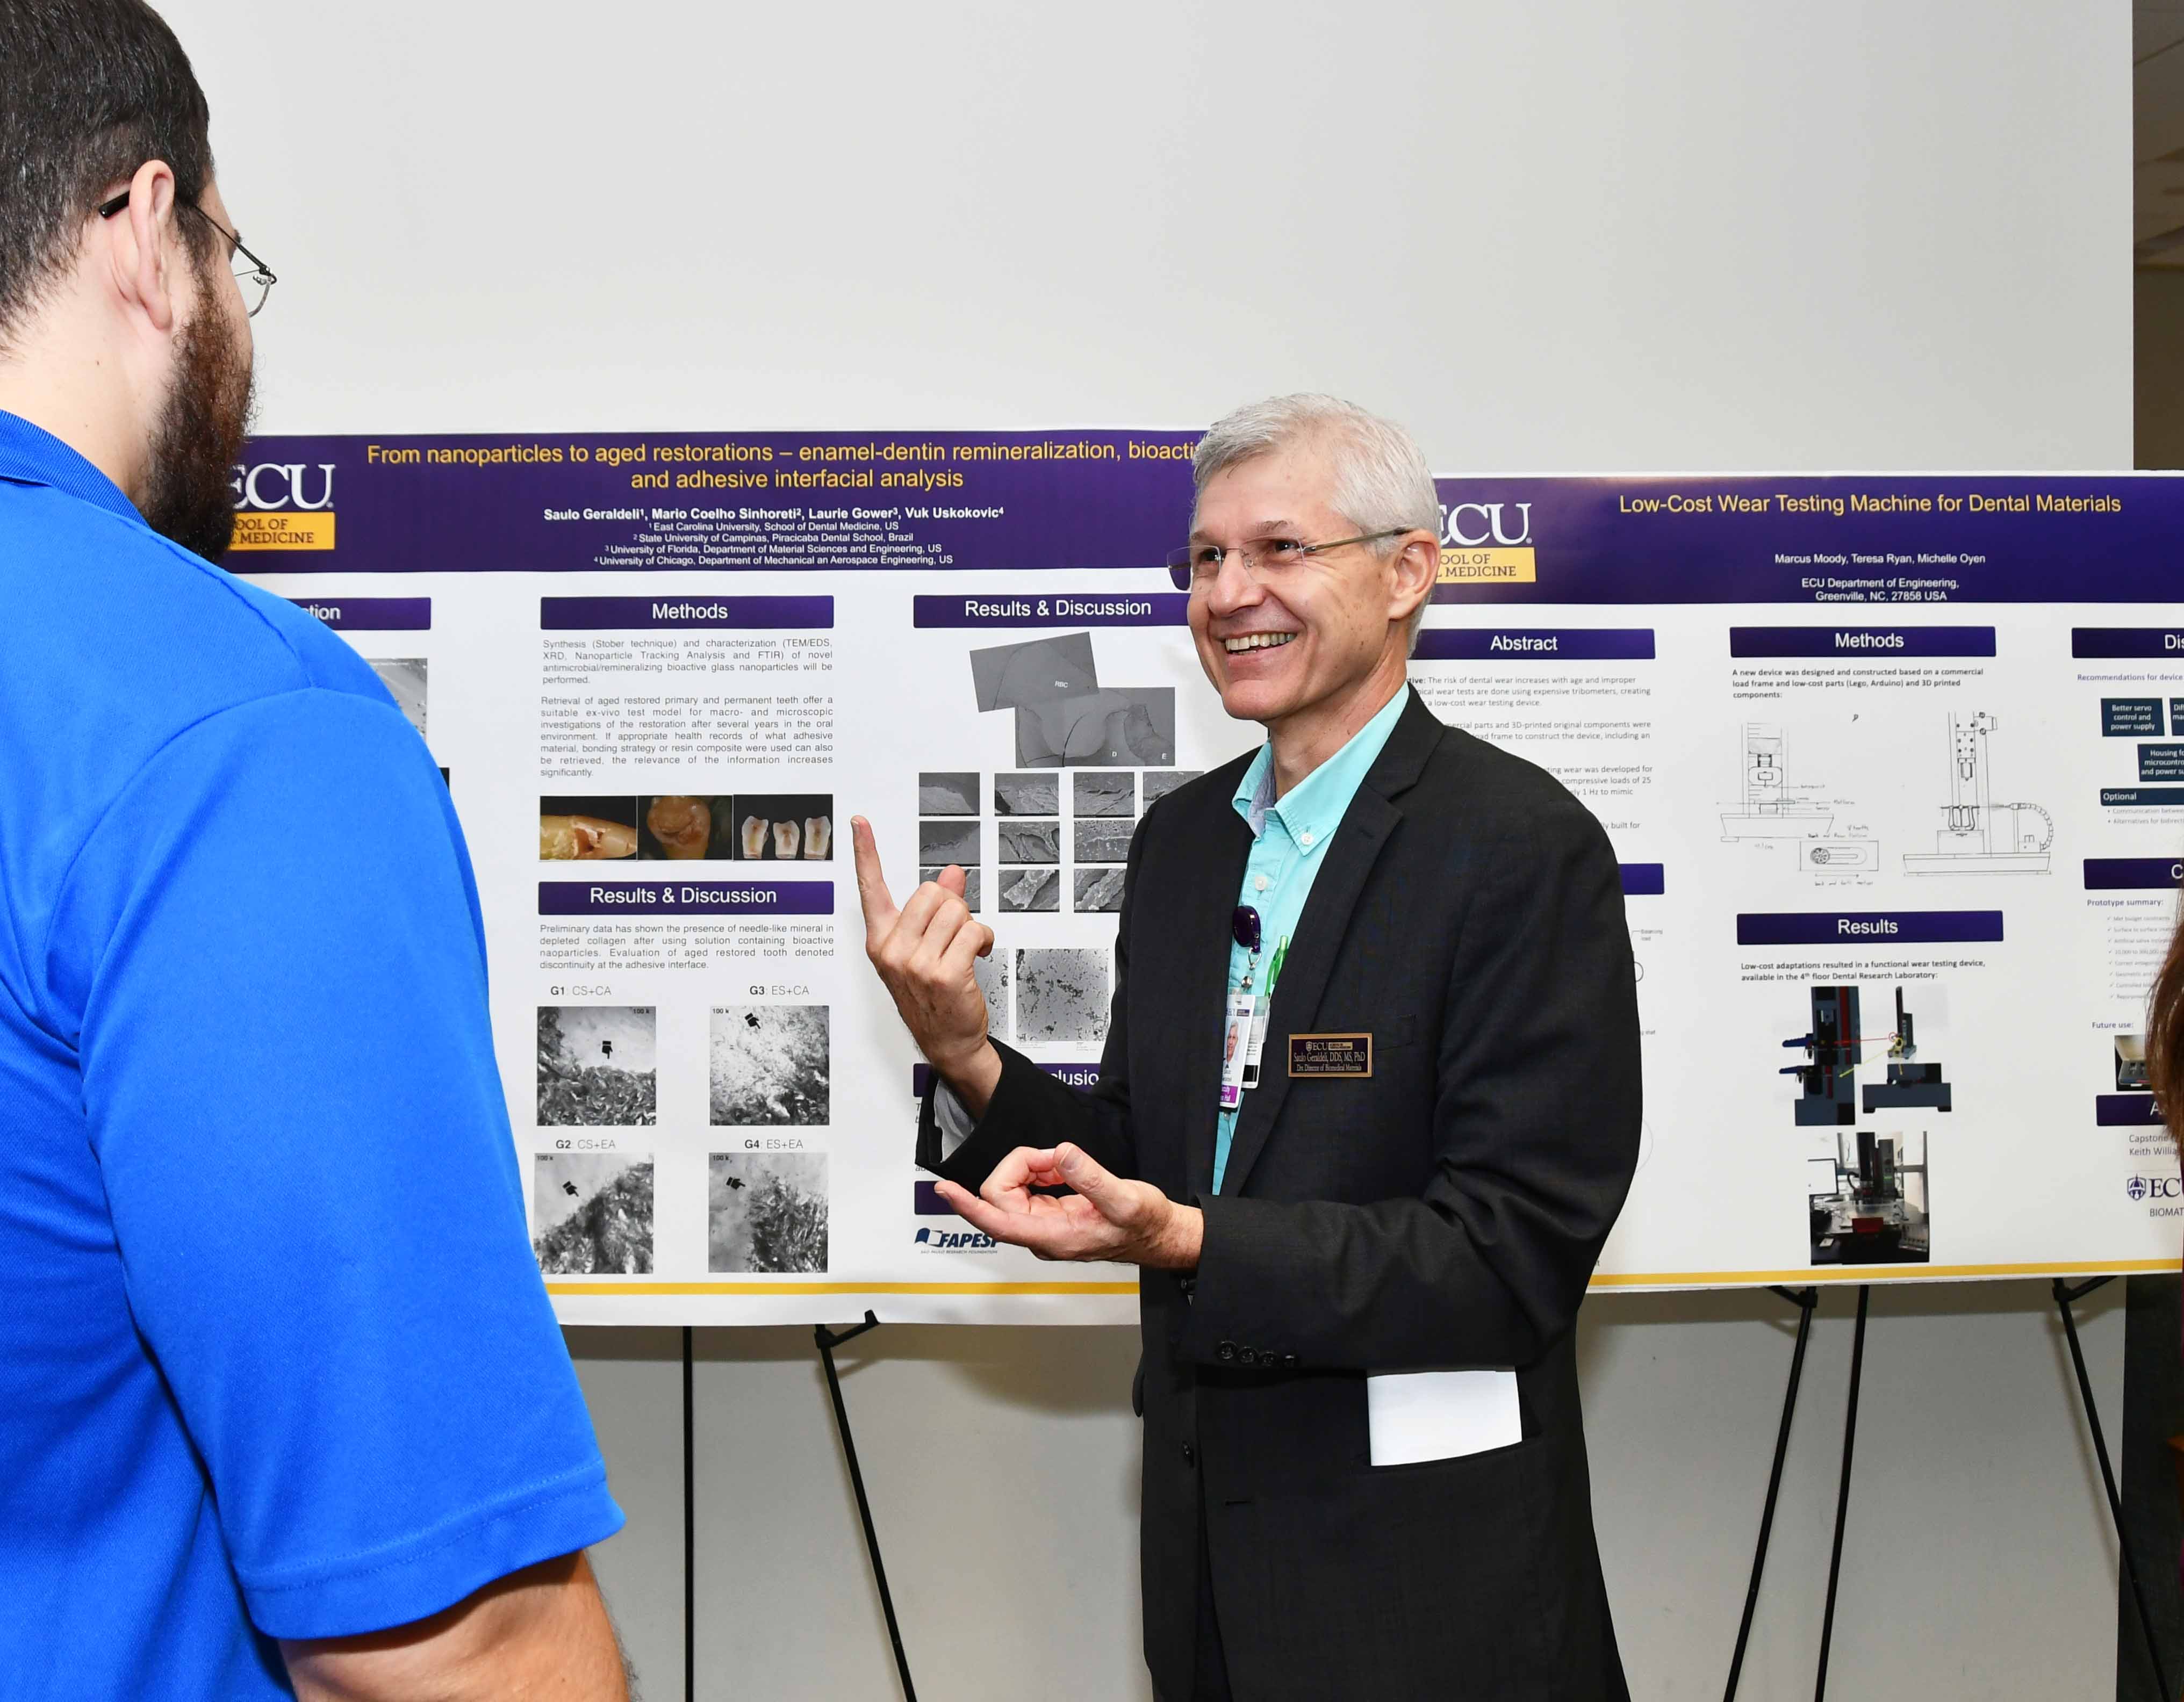 Presenter shares research poster at Dental School event